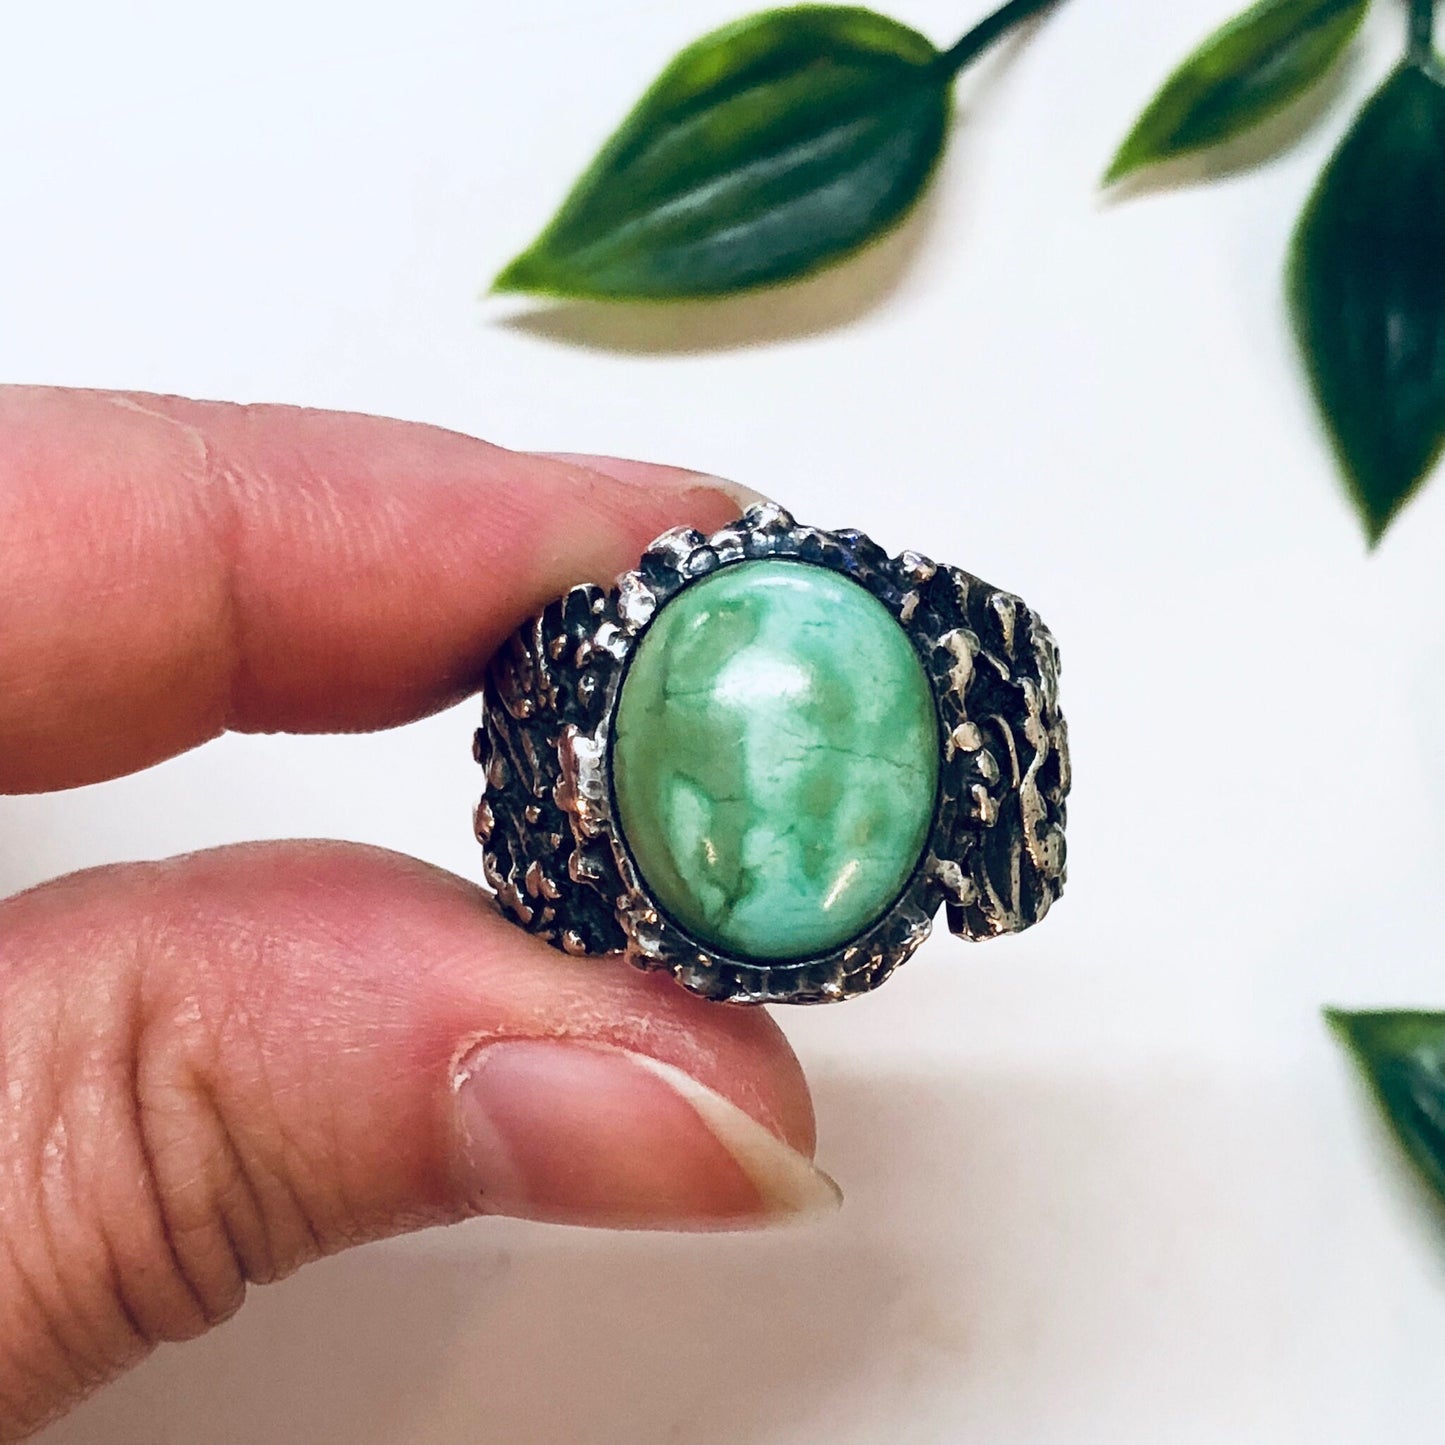 Vintage sterling silver ring with large oval turquoise cabochon set in textured silver bezel, held by a hand with green leaves in the background.